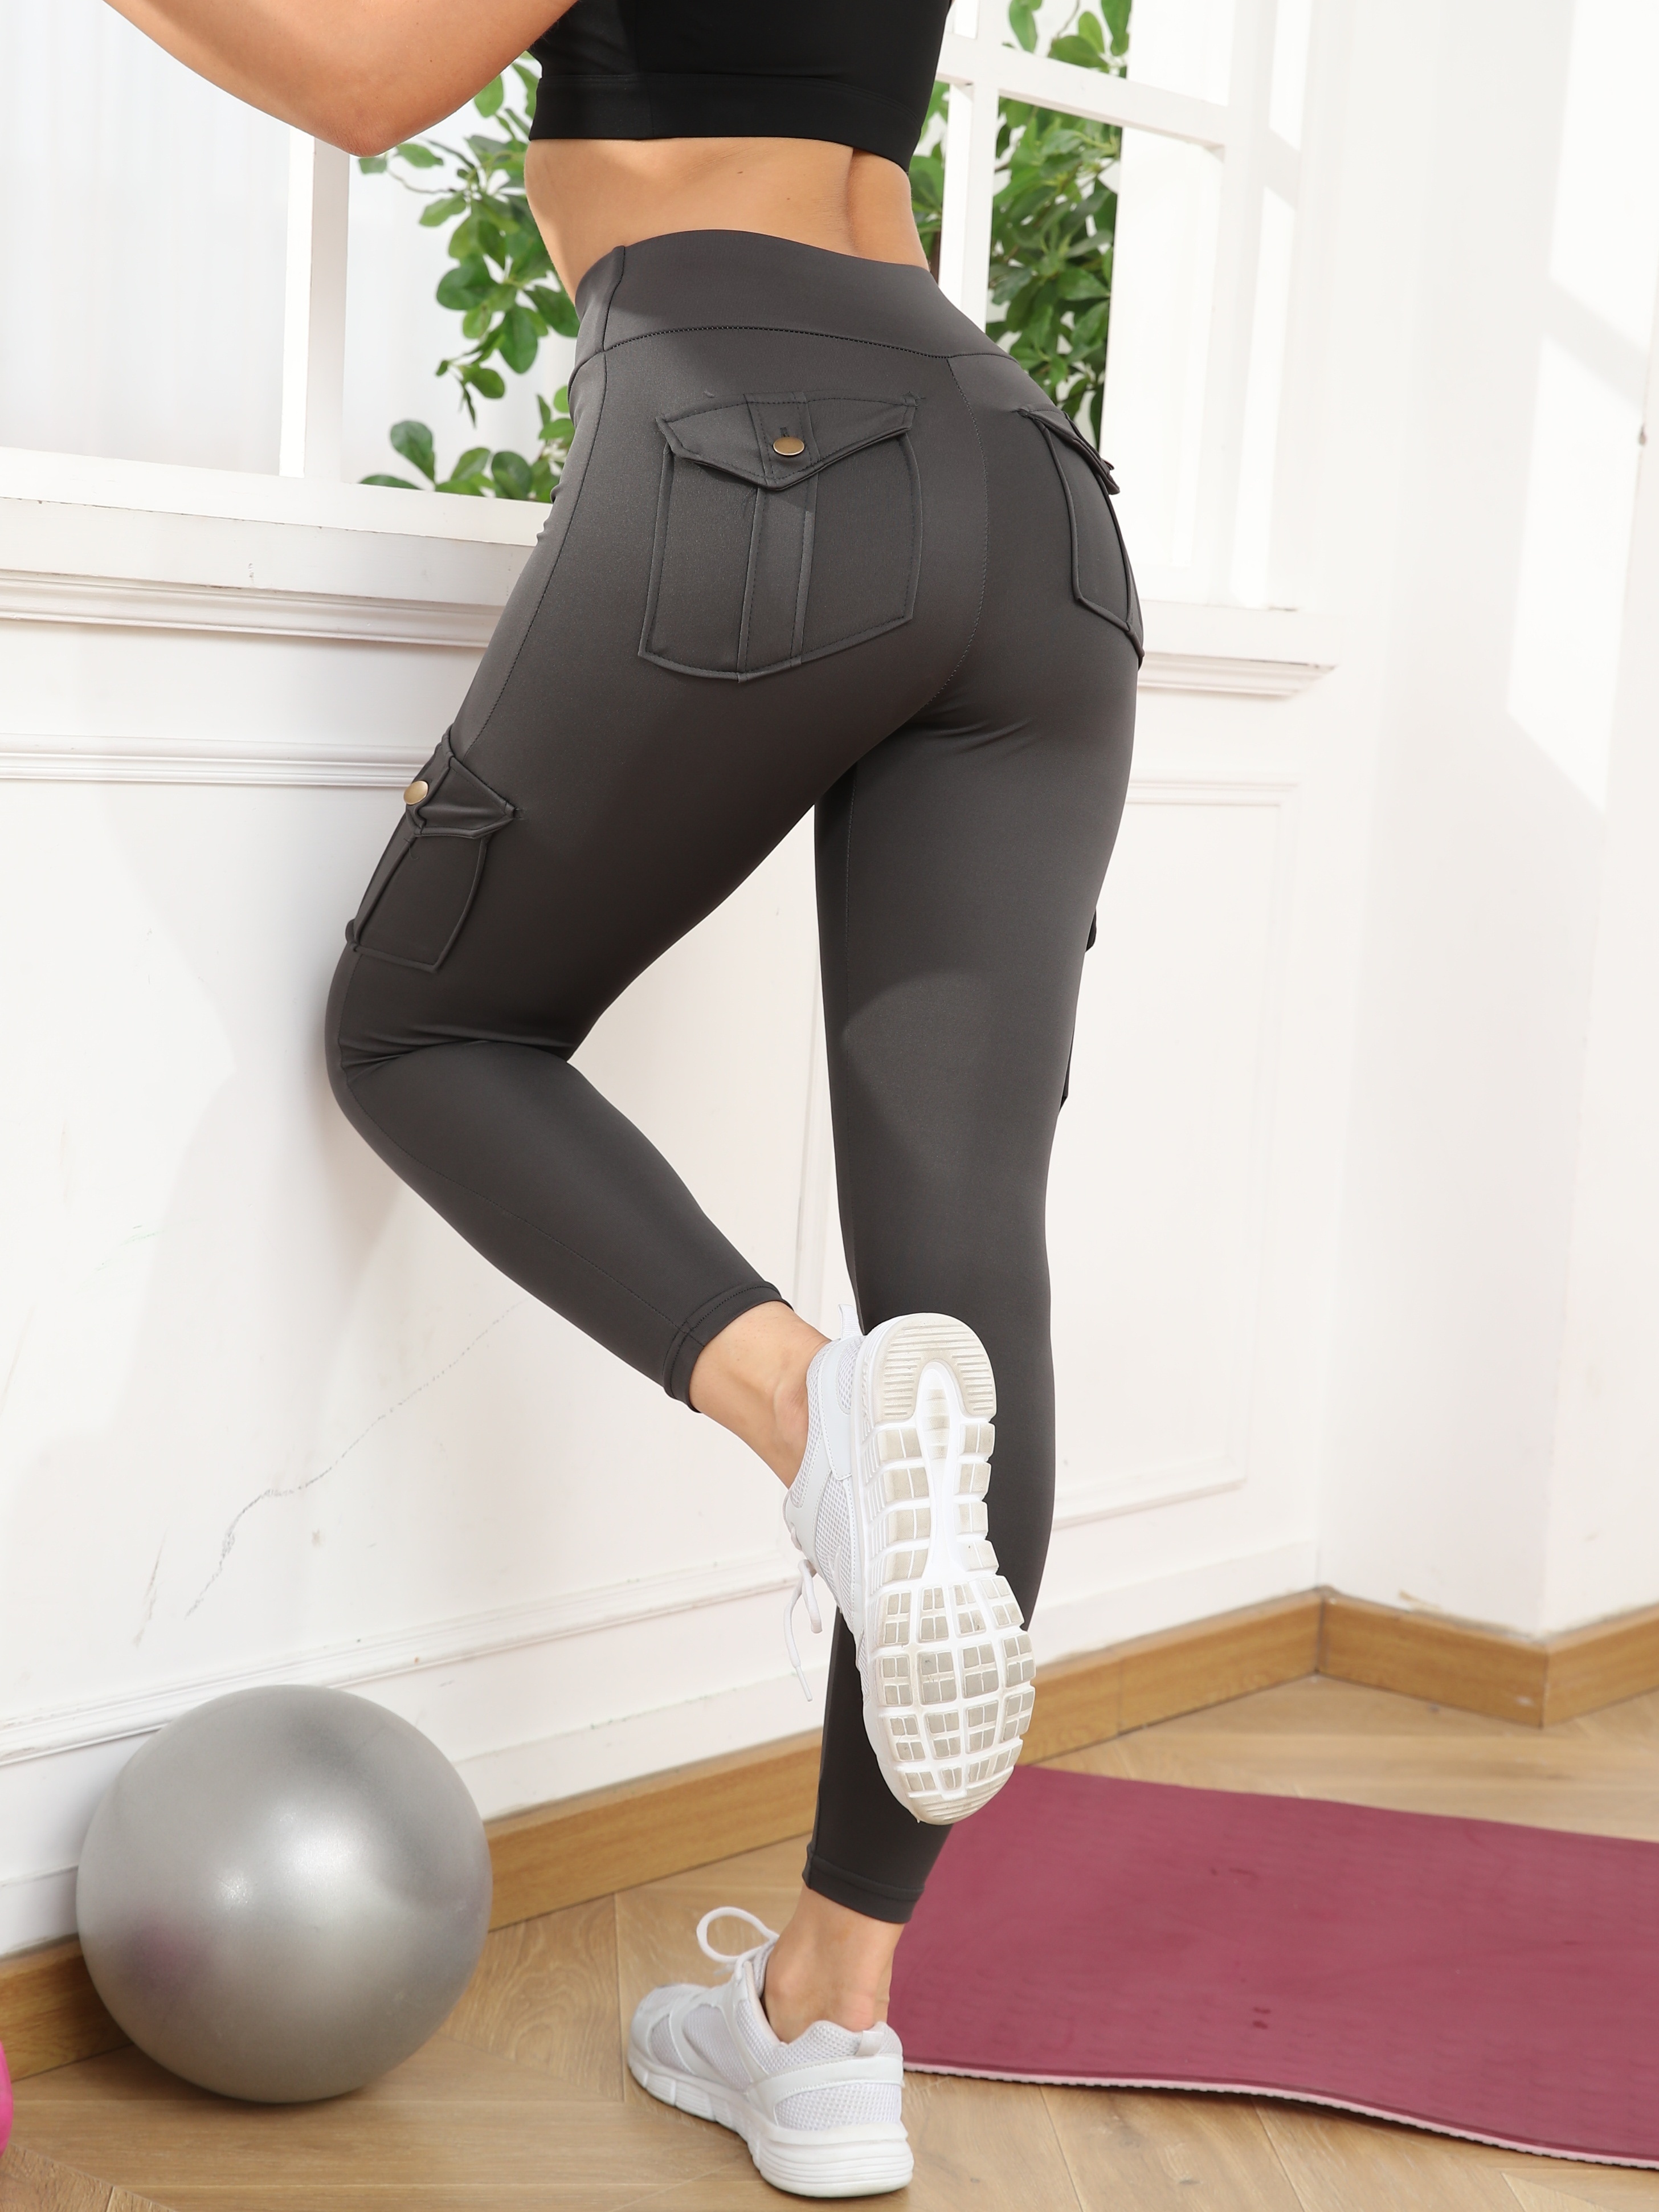 High Waist Sport Pants Push Up Women Tights Fitness Pants Tummy Control  Elastic Running Training Workout Outfit Women Clothing